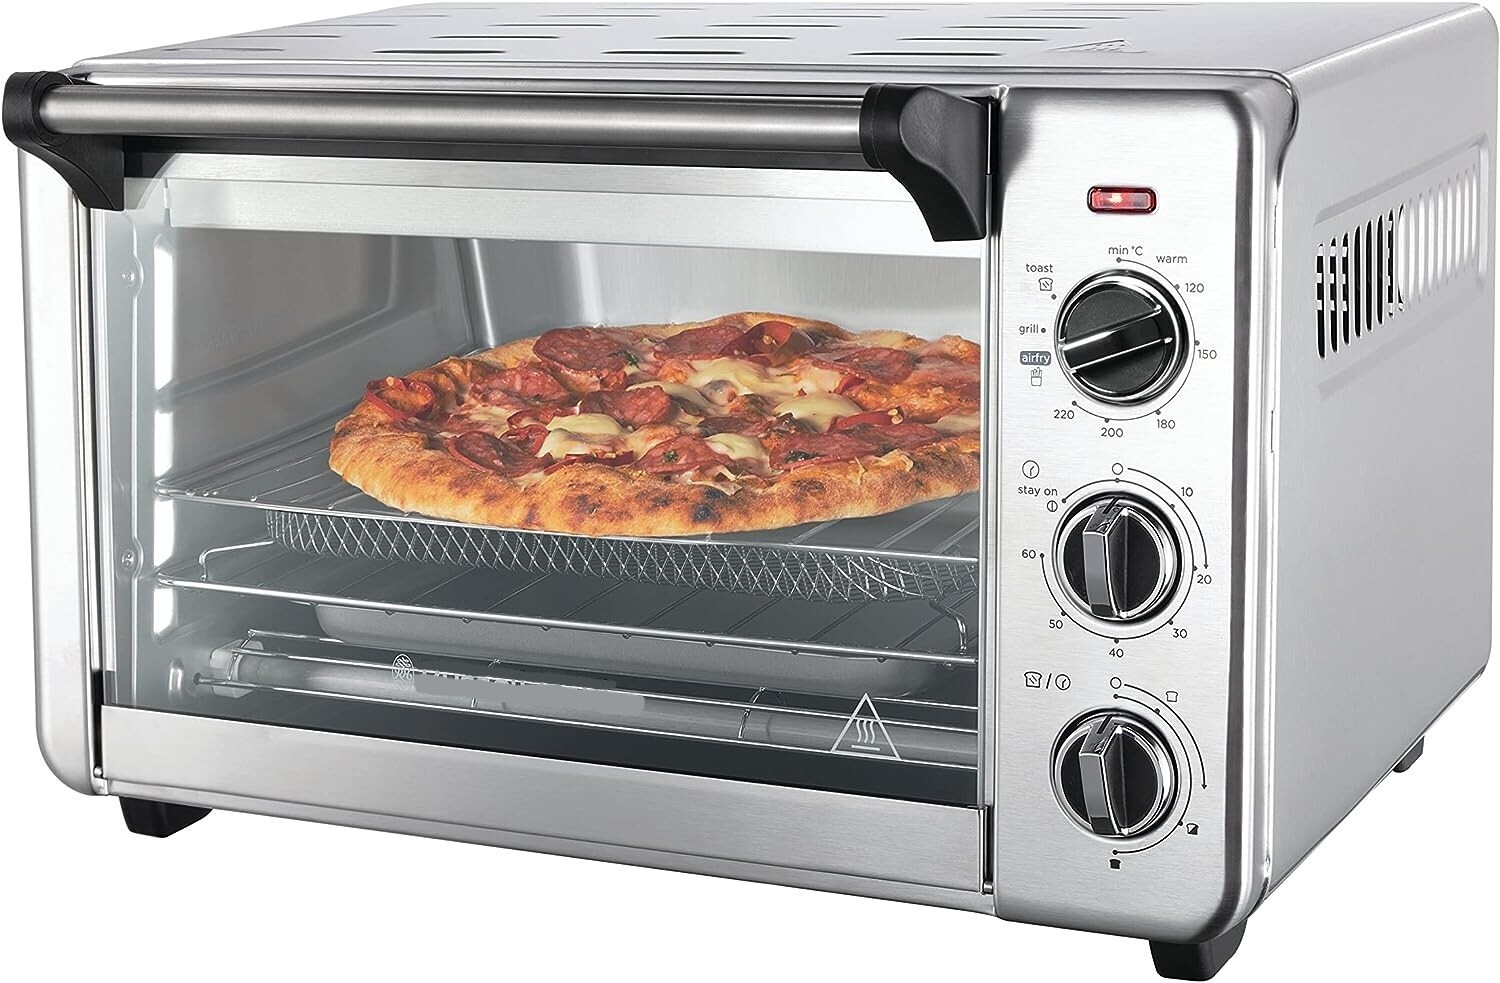 Airfryer Oven 5-in-1: 20 L, 30 cm pizza diameter, toasting function, mini oven, grill, baking tray, and grill rack; includes fry basket, baking tray, and grill rack